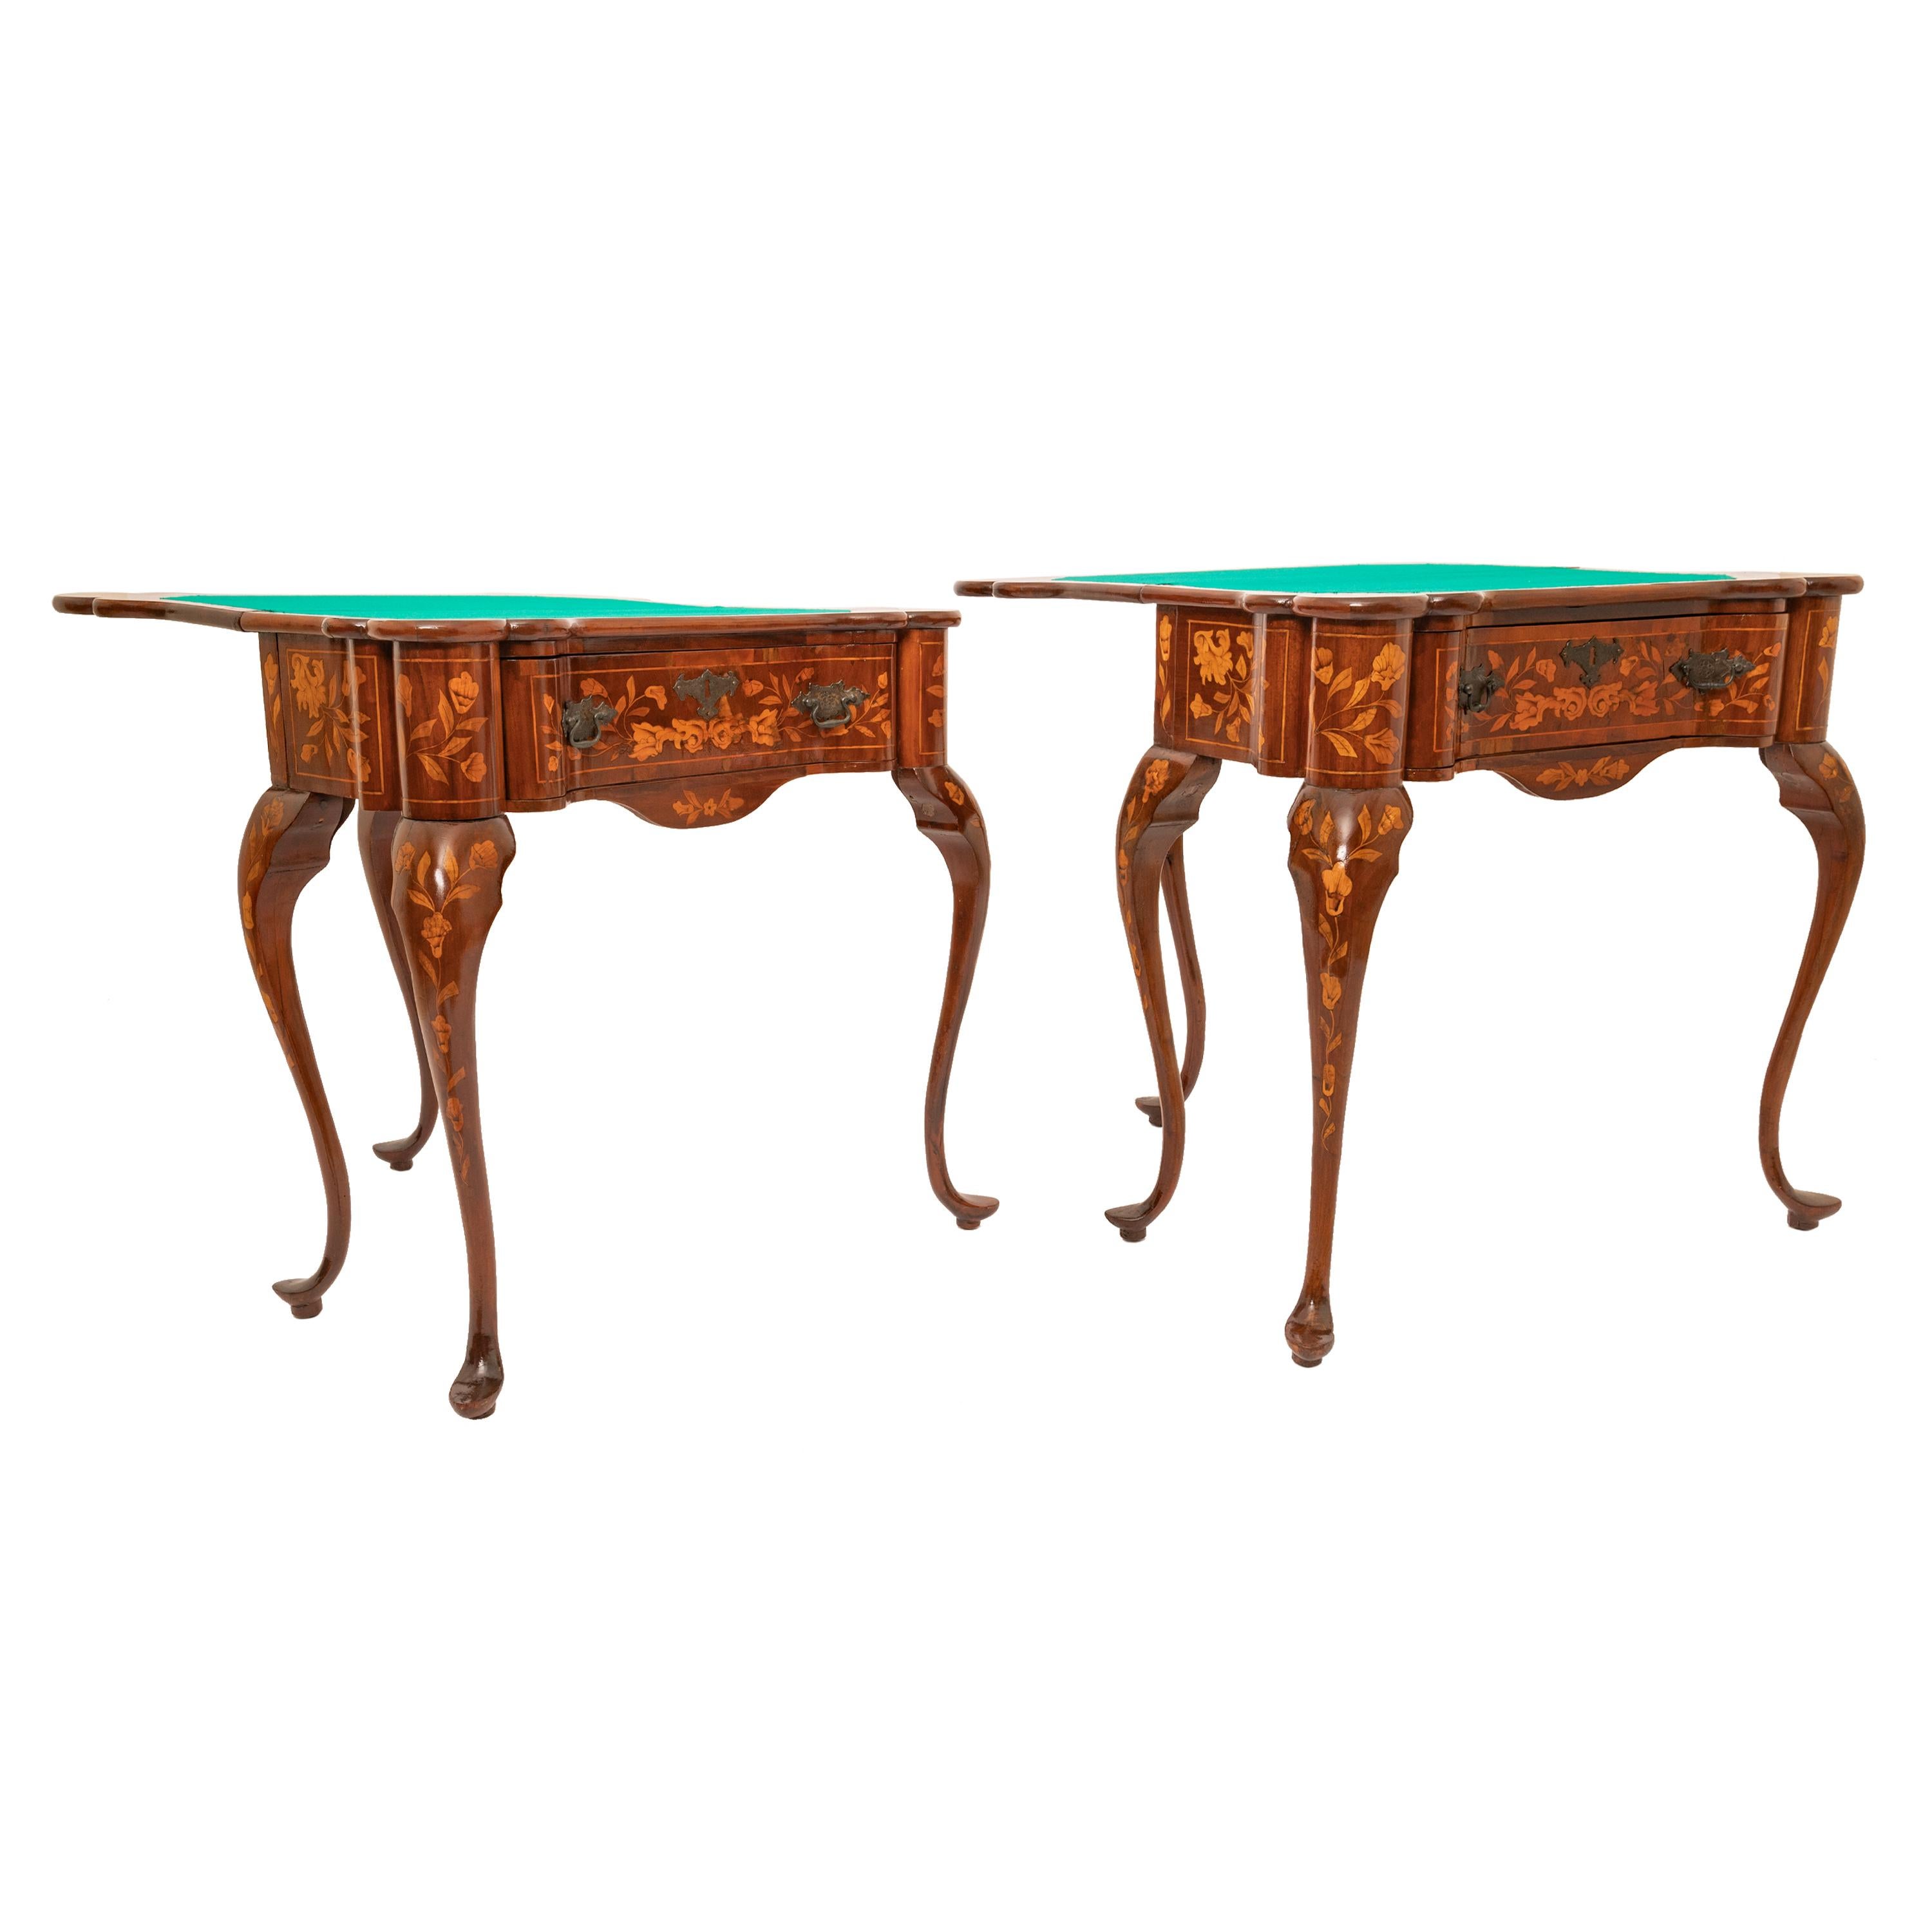 Pair Antique 19th Century Dutch Walnut Marquetry Card Game Console Tables 1820 In Good Condition For Sale In Portland, OR